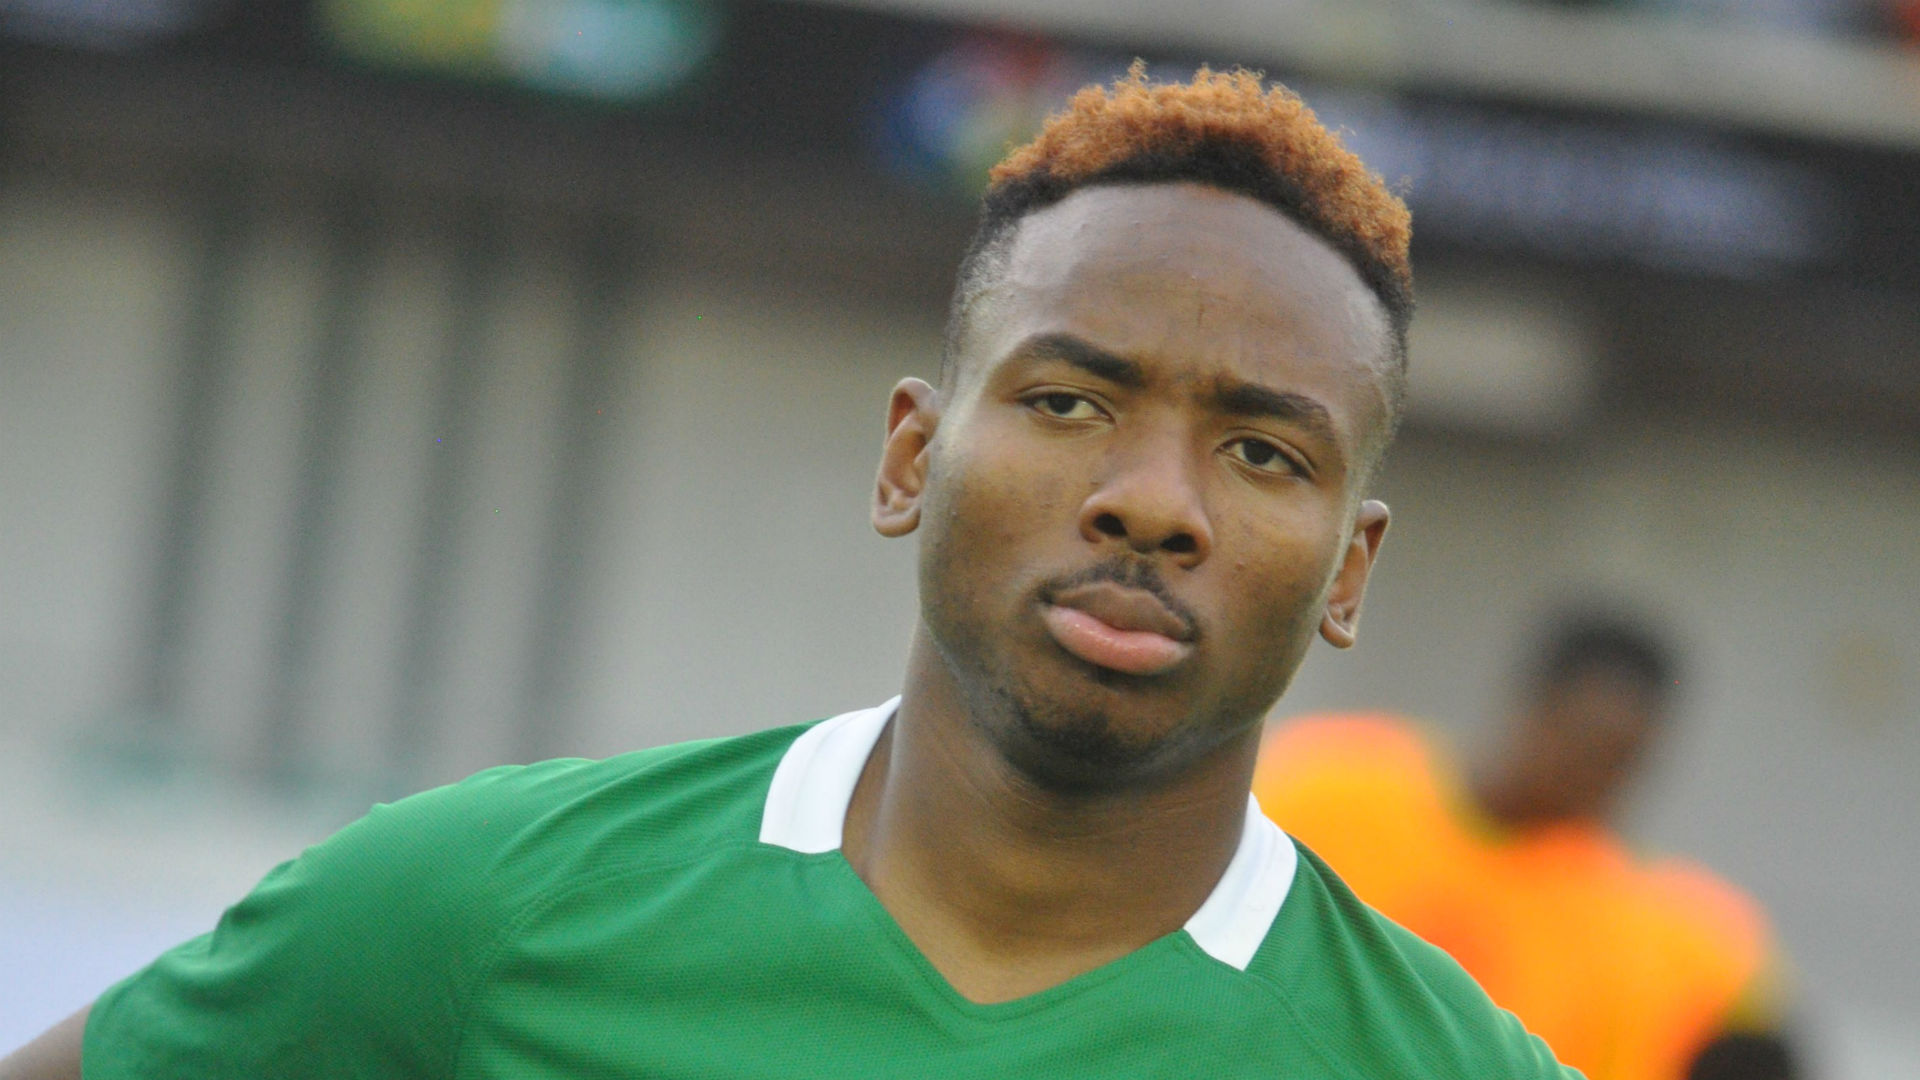 Kelechi Nwakali may dump Nigeria for another country, says Agent - Vanguard  News